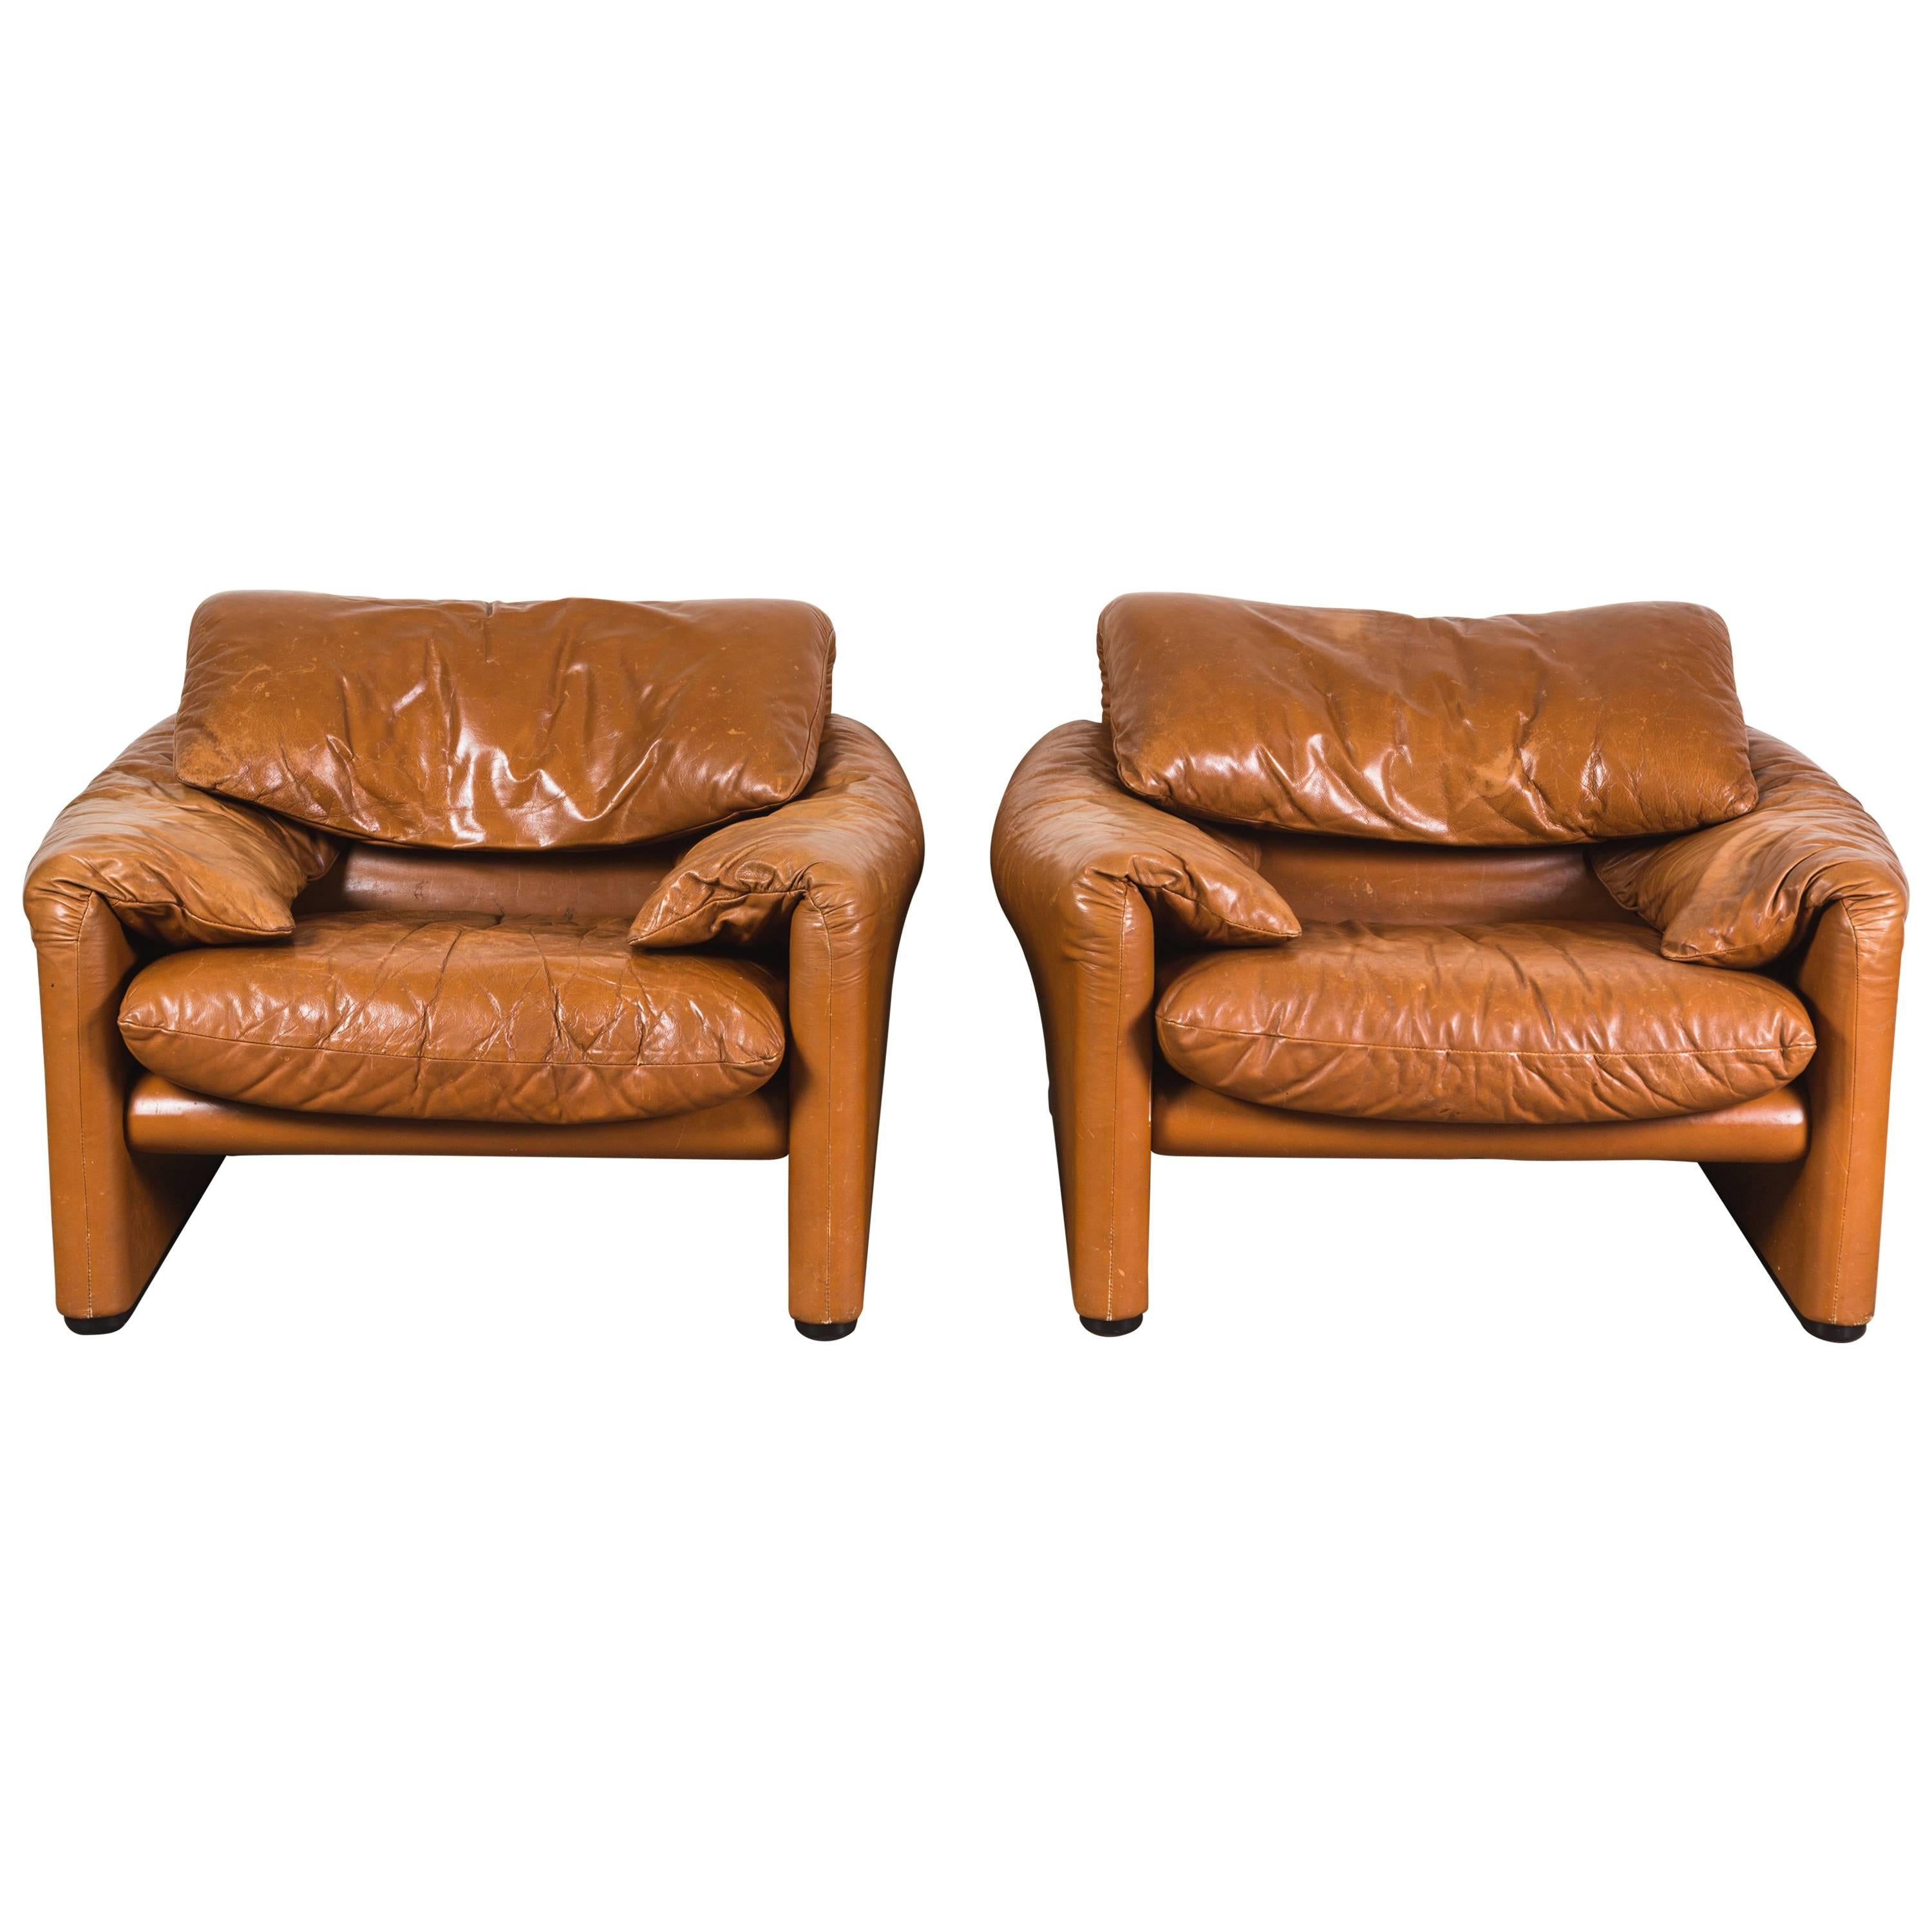 Pair of "Maralunga" Lounge Chairs and Ottomans by Vico Magistretti for Cassina